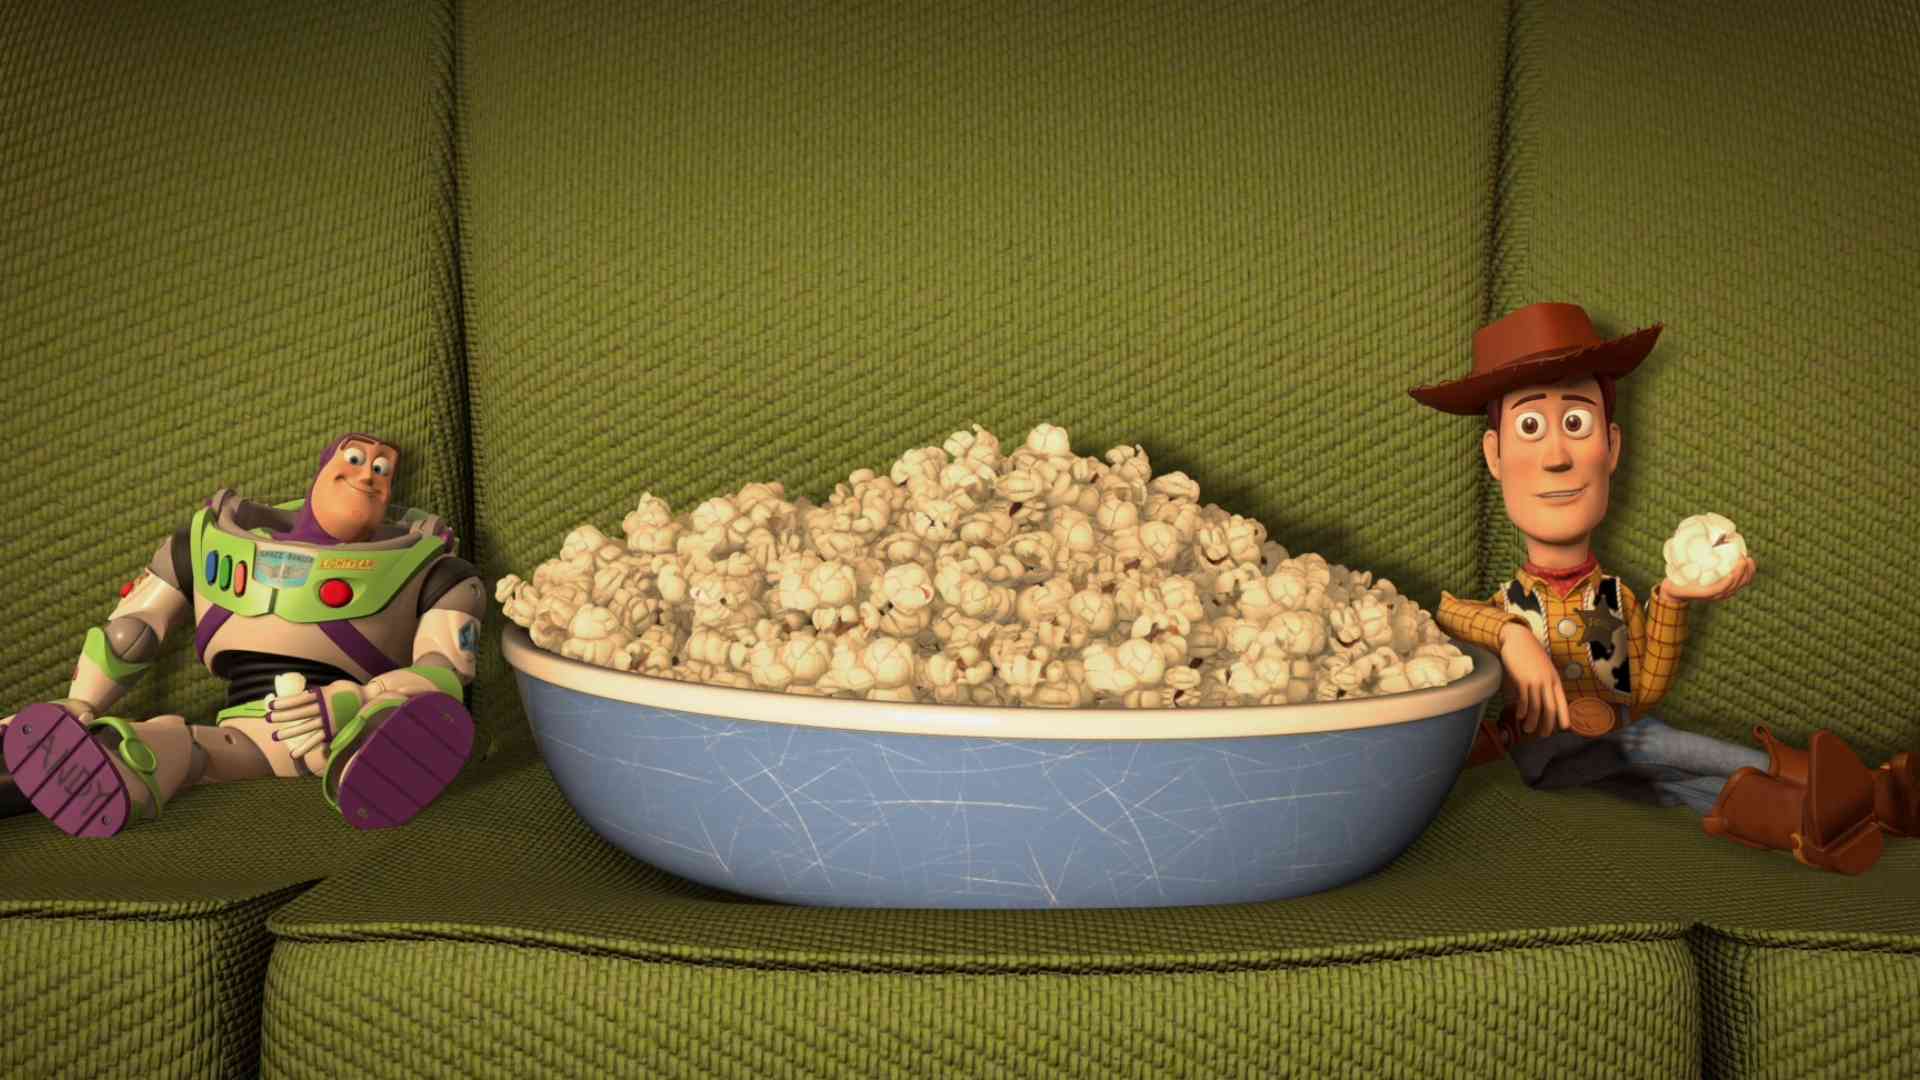 2531_Toy-Story-characters-eating-popcorn.jpg